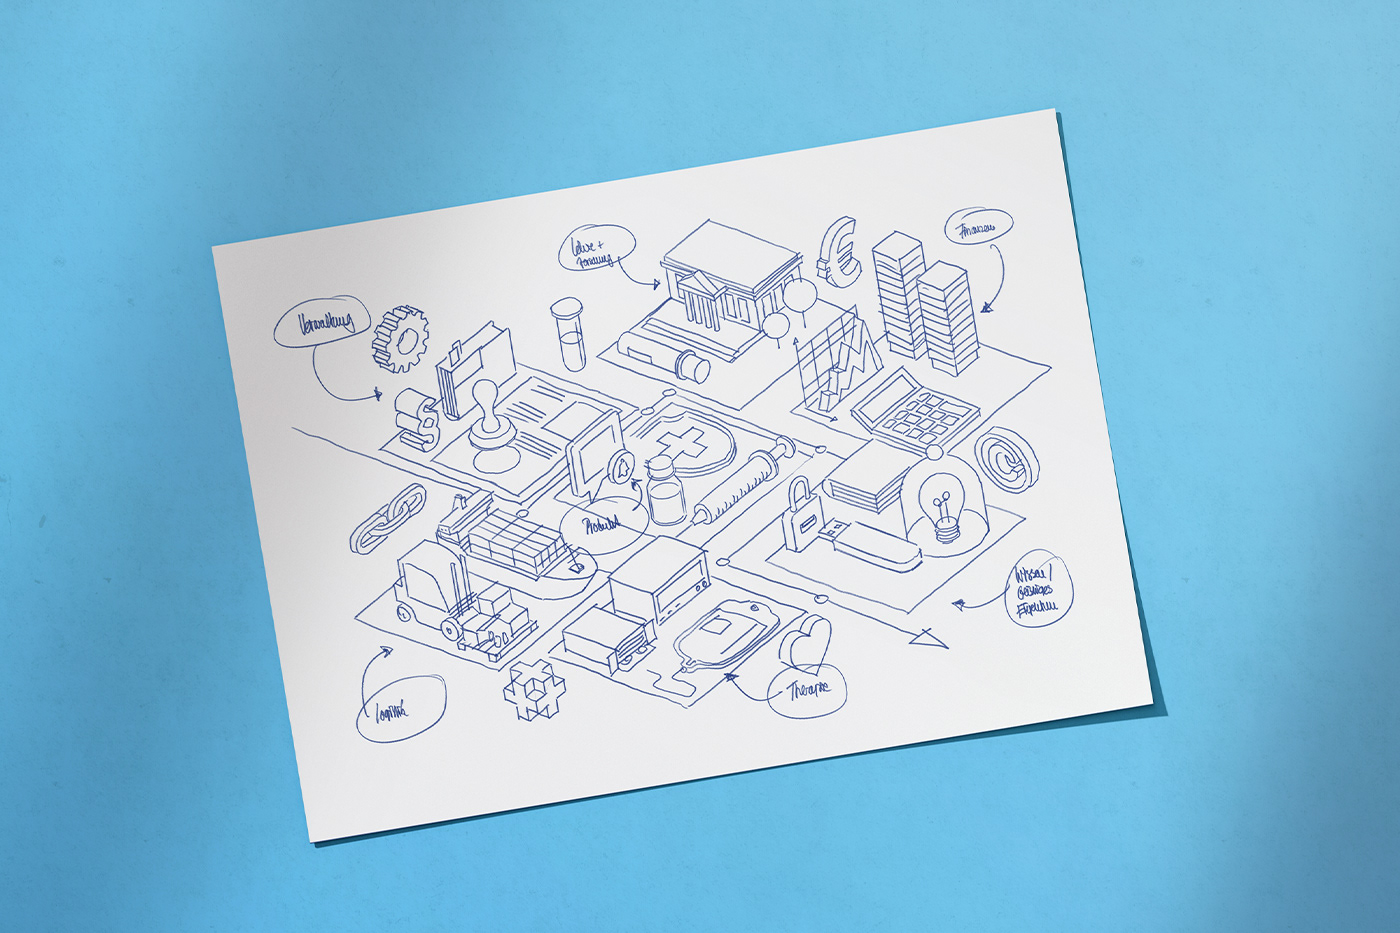 Concept sketch for isometric infographic by Adrian Bauer